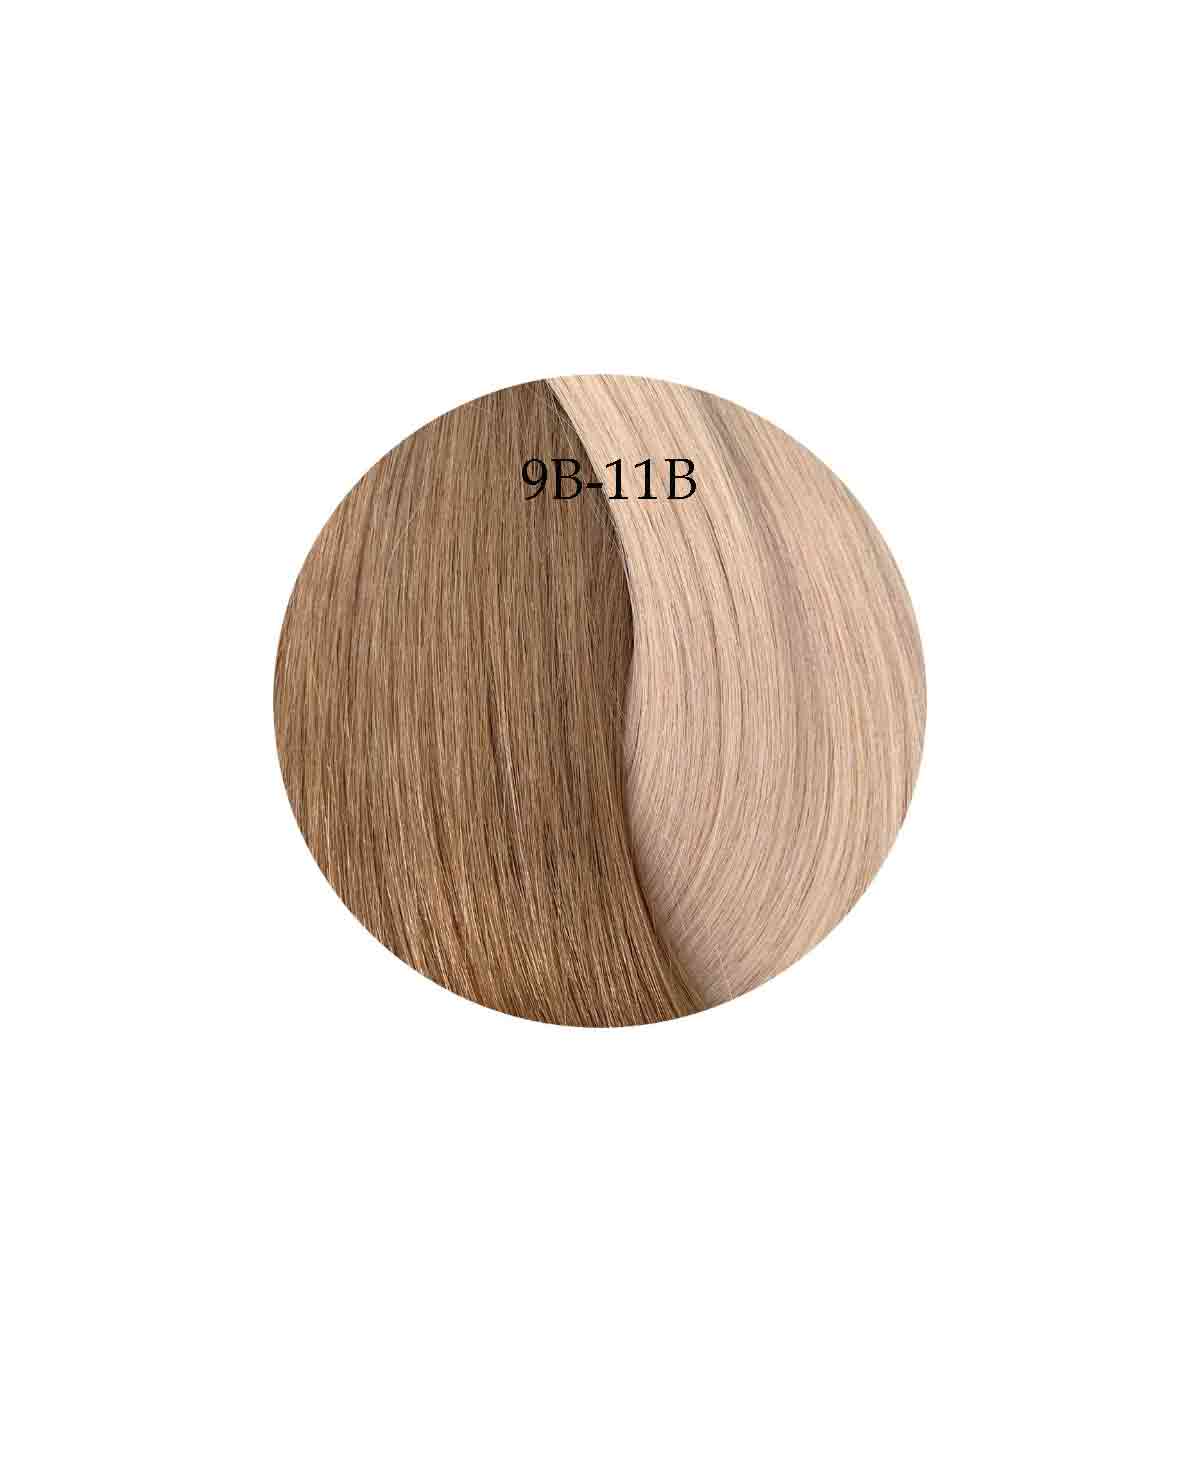 Showpony 45-50cm (20") 3 in 1 HALO Hair Exstension - Ombre - 9B-11B Cool Soft Blonde